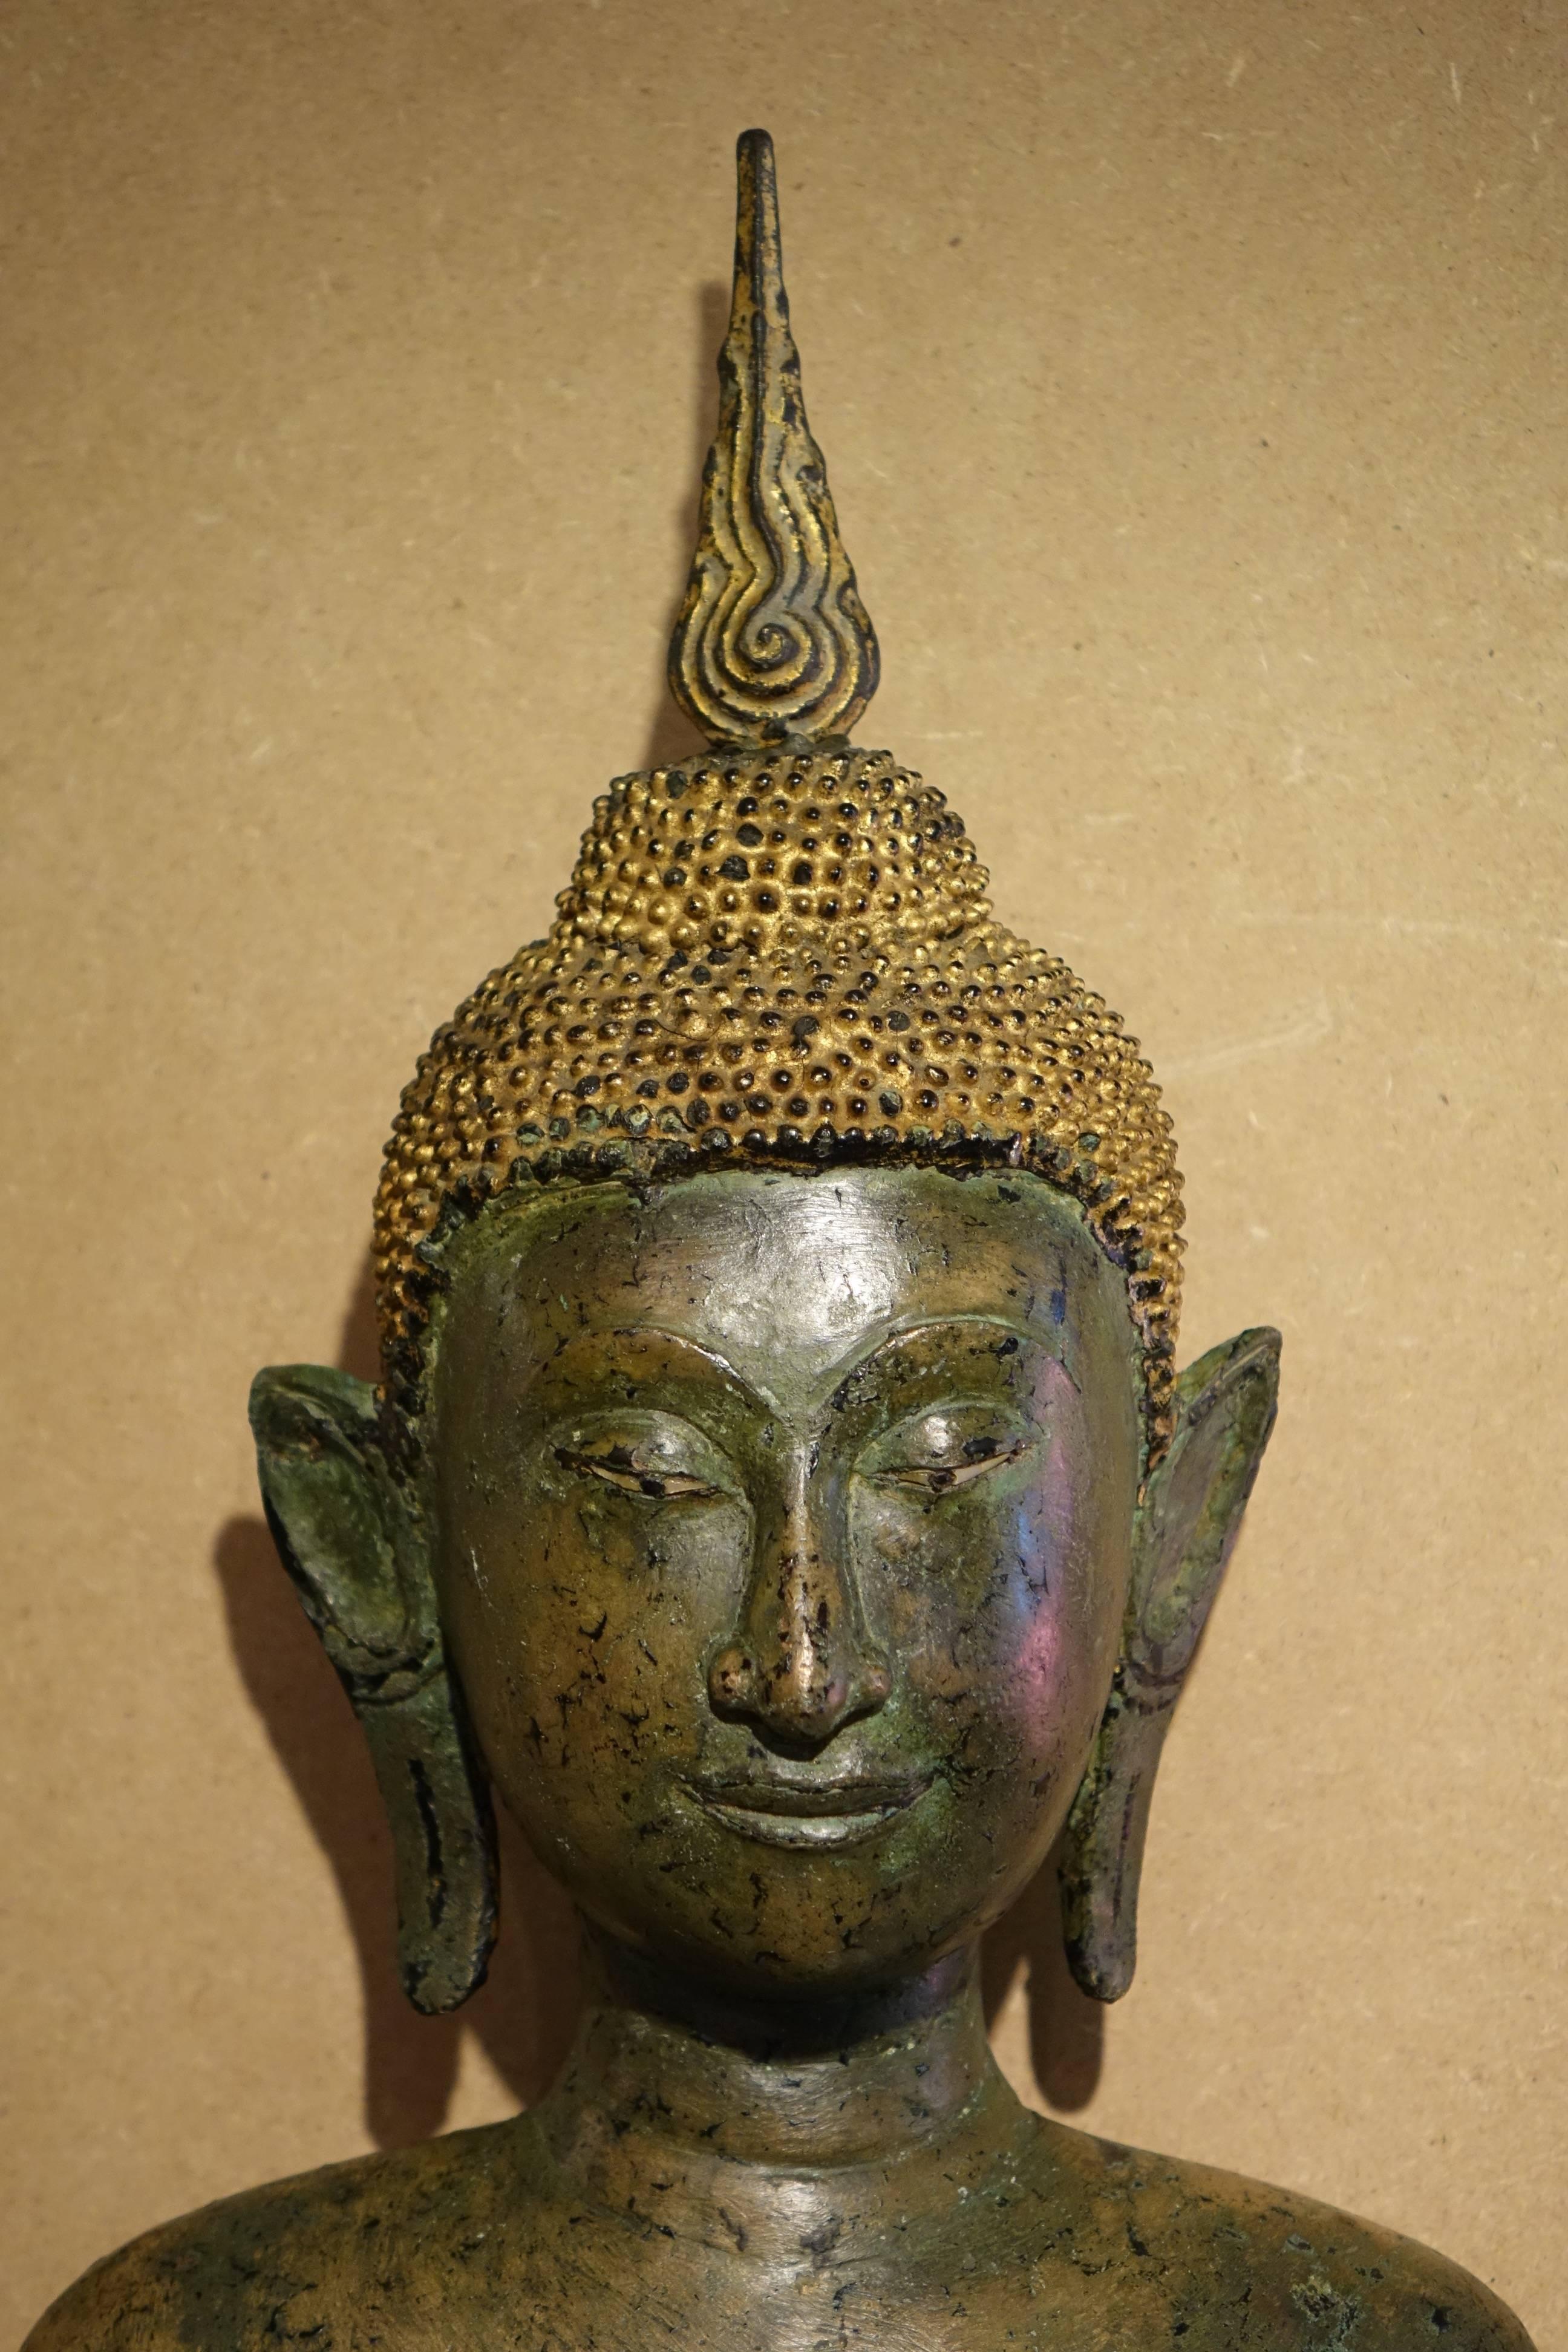 Ayutthaya style, bronze figure of Buddha 17th century, standing in samabhanga, both hands in Abhayamudra, wearing long cloak covering both shoulders, his face with downcast expression,, aquiline nose, smiling lips, elongated earlobes, curled